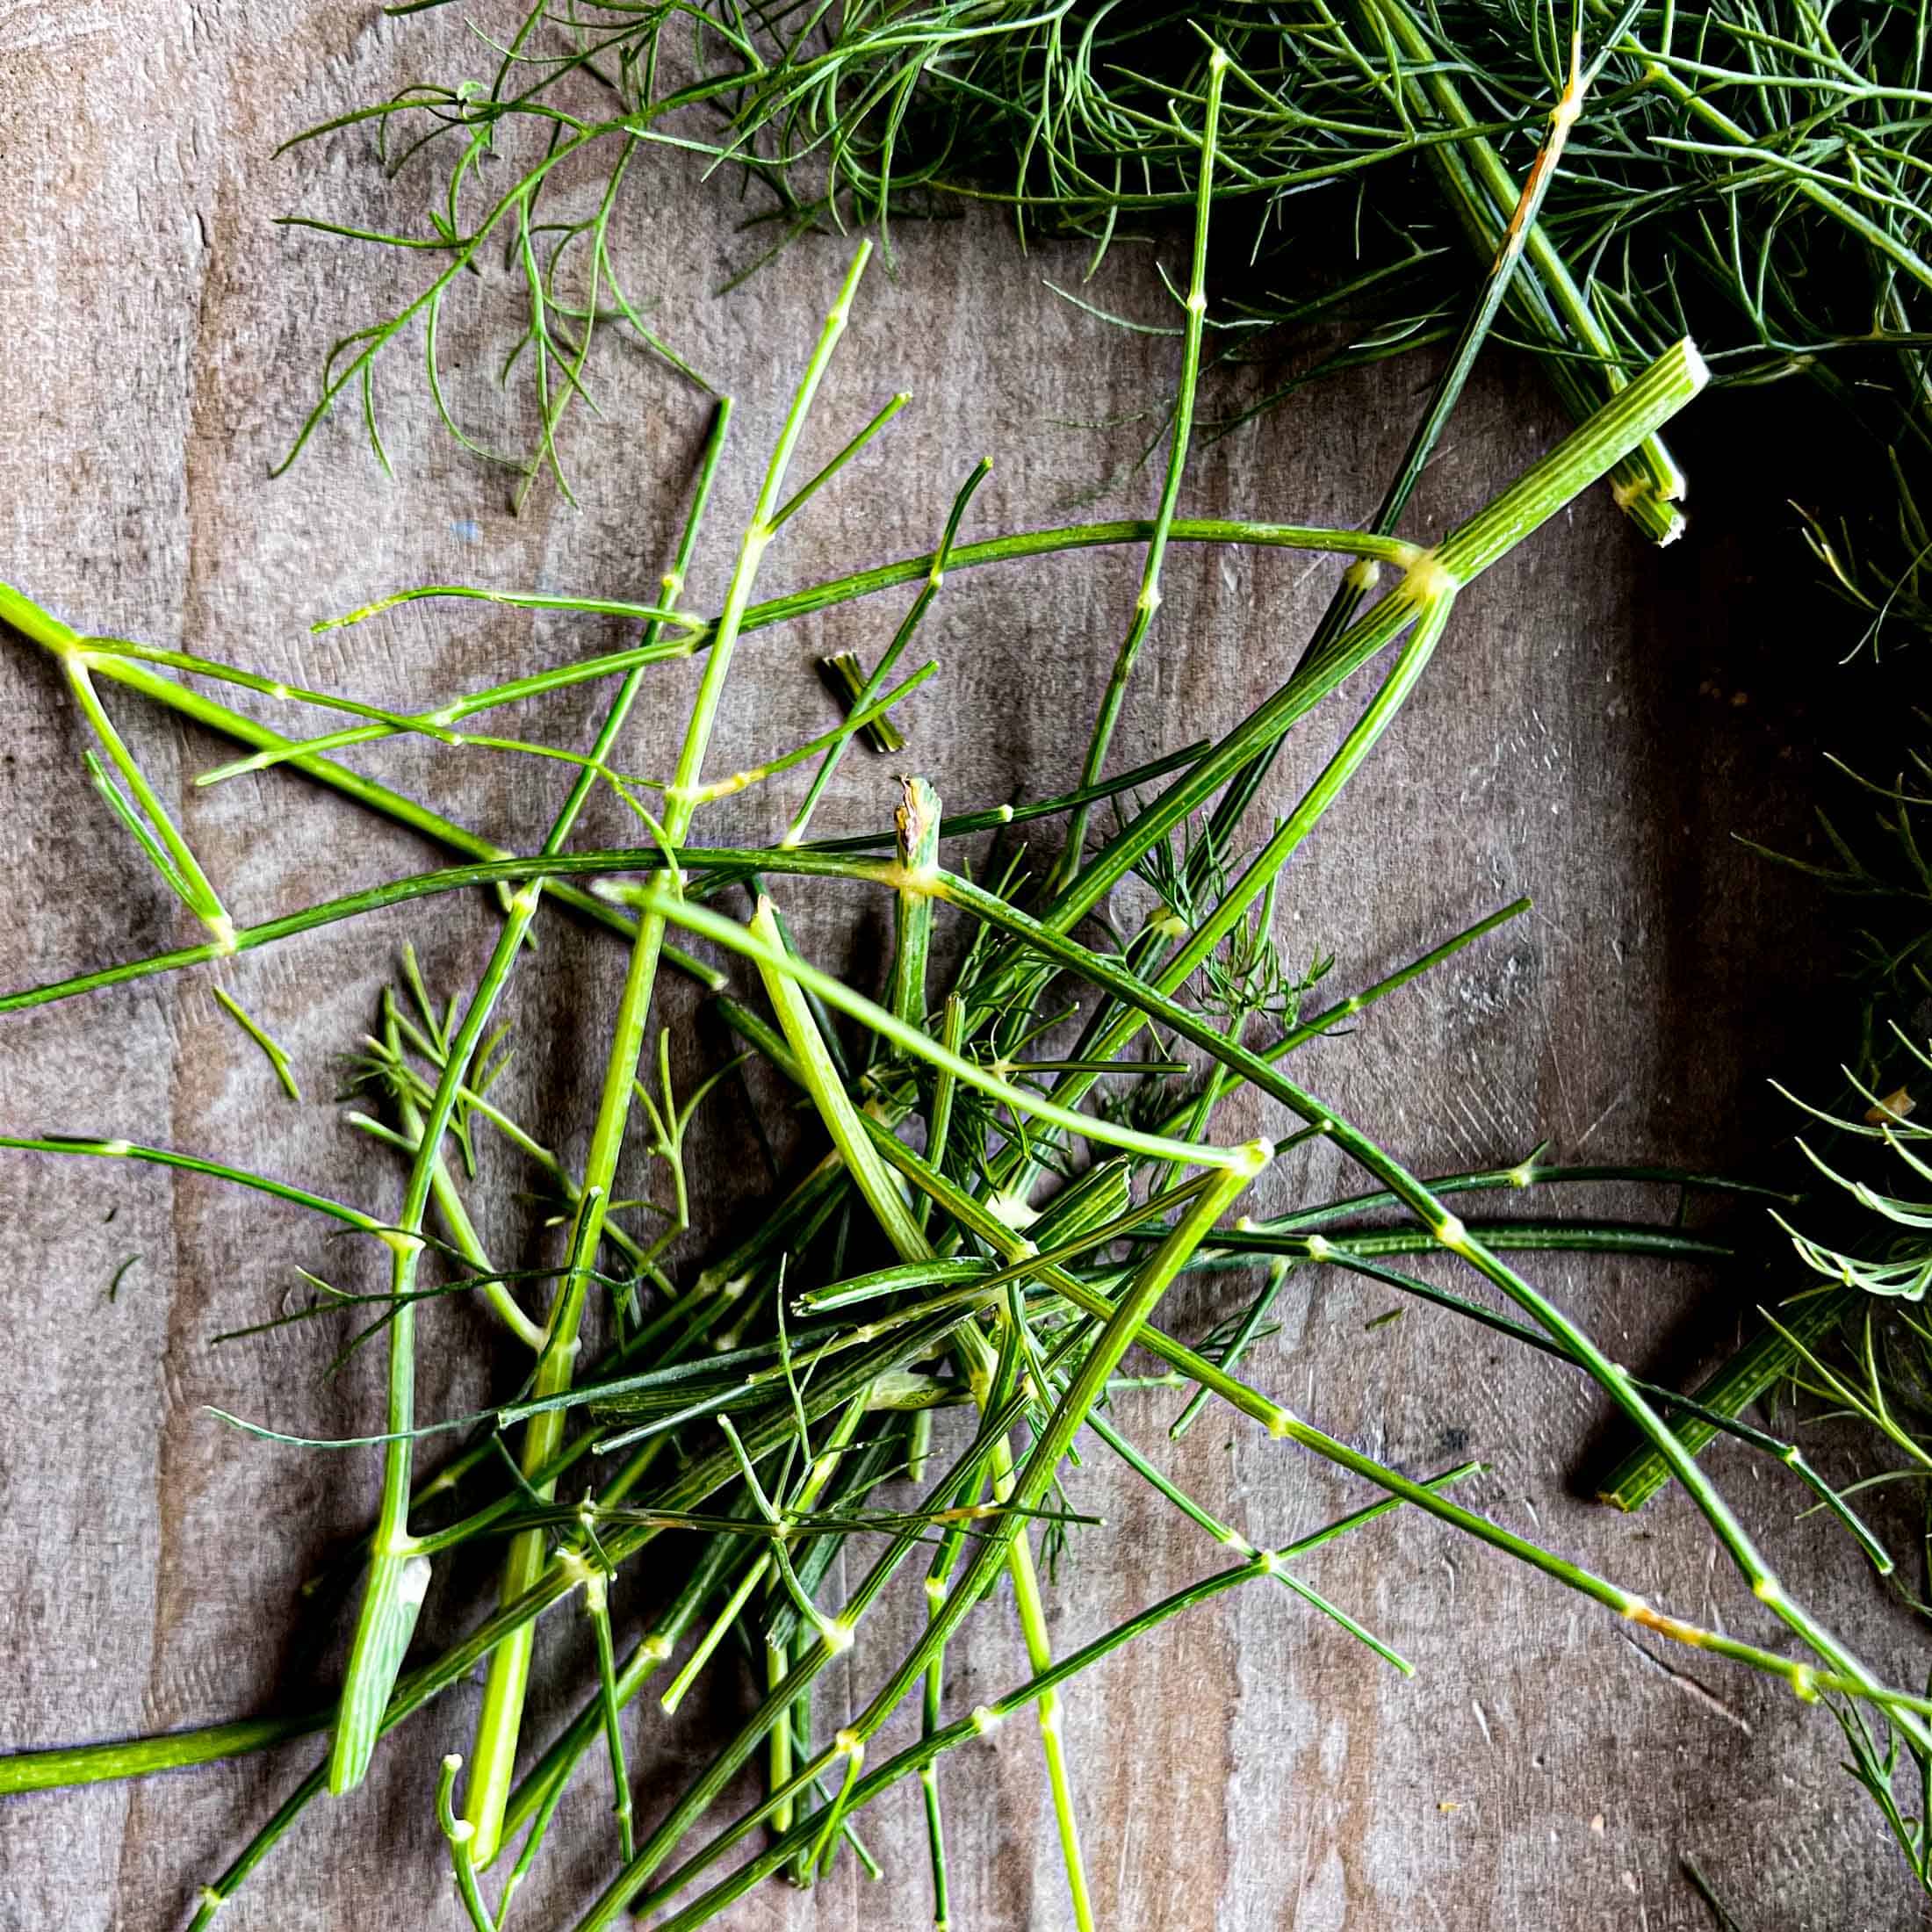 Dill stems with the leaves removed.